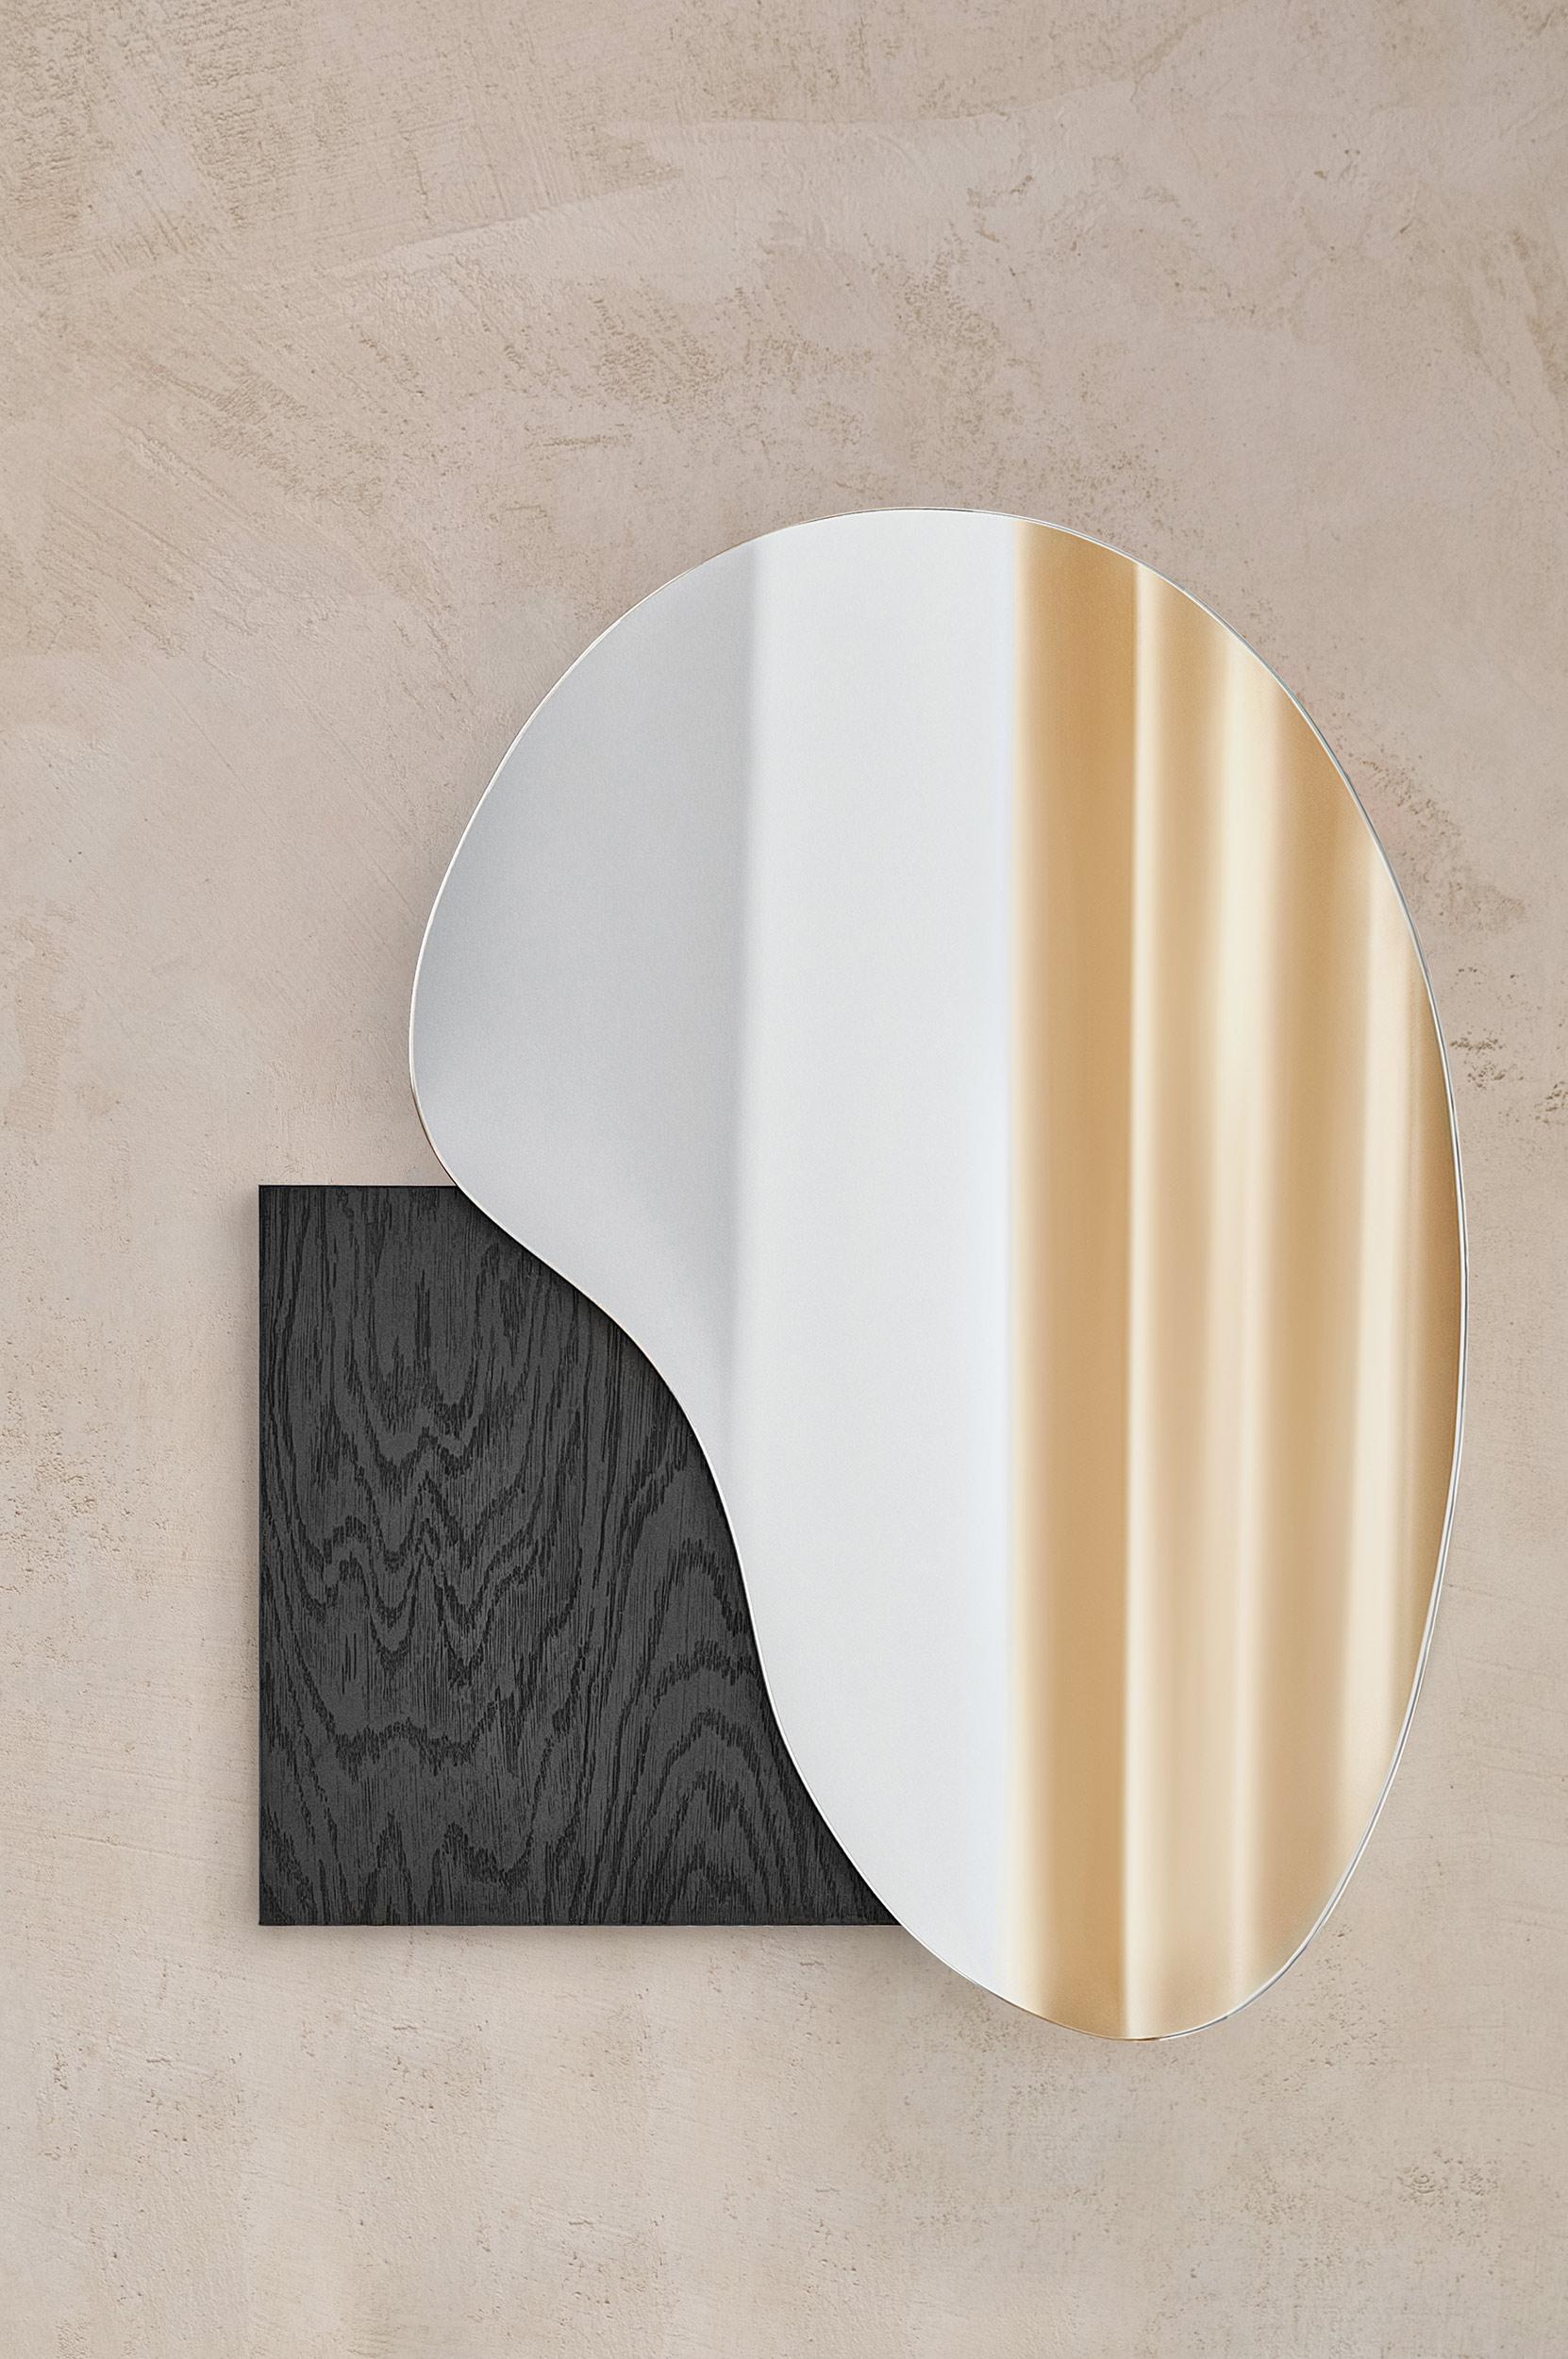 Brand: NOOM
Designers: Maryna Dague & Nathan Baraness

Type of Mirrors: Optiwhite, Black tint mirror, Copper tint mirror
Materials for base: Veneered wood, Madrona wood veneer, Burned steel, Stainless steel / Hand brushed stainless steel, Brushed